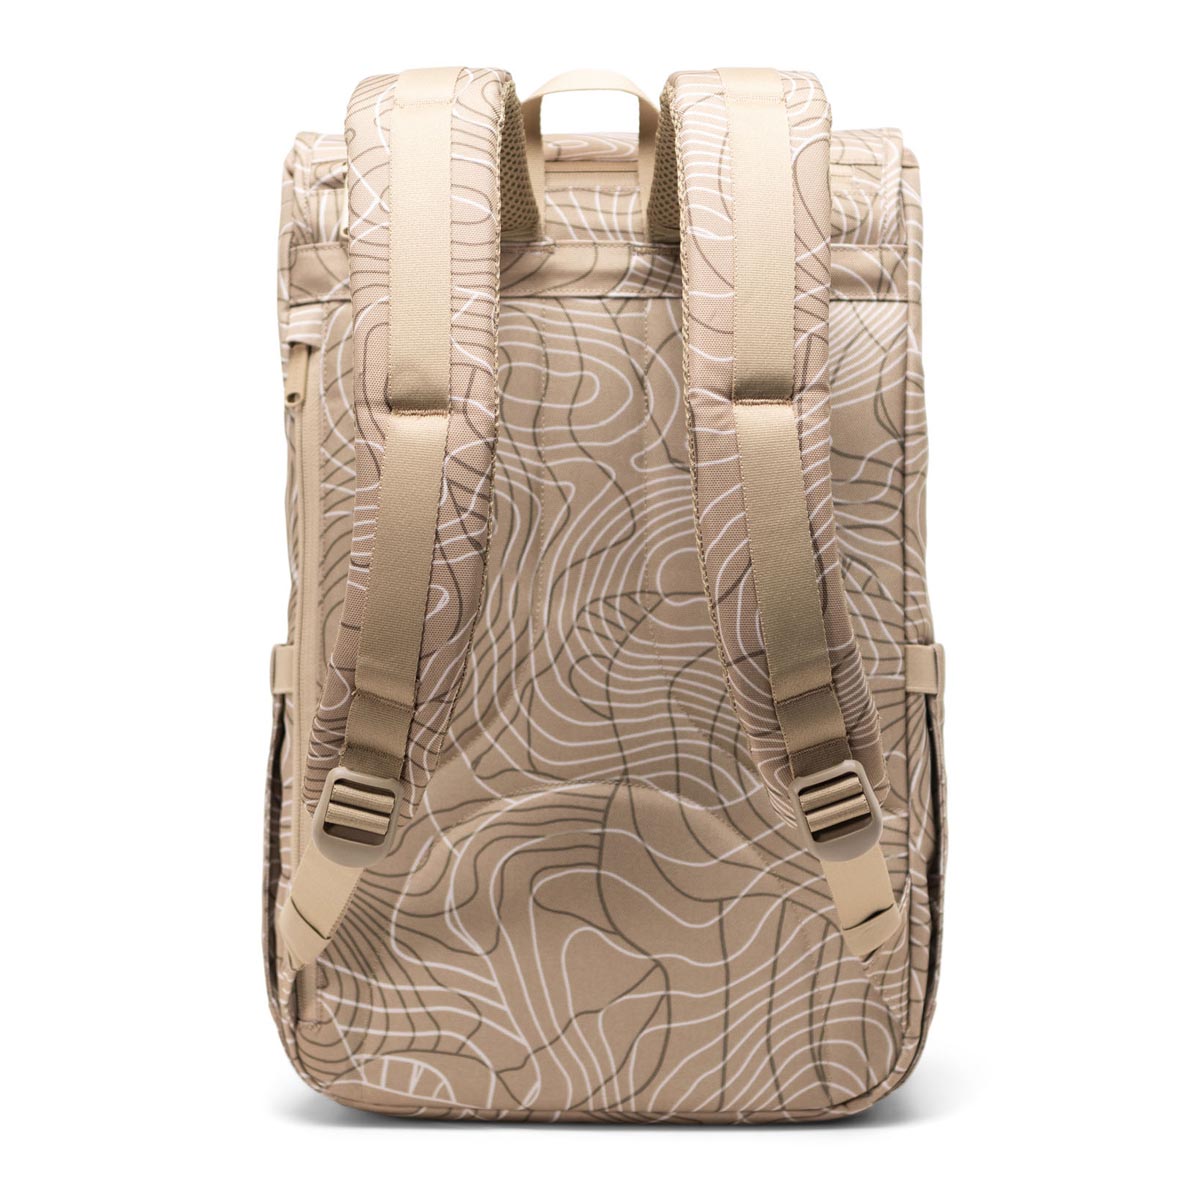 Herschel Supply Little America Mid Backpack - Twill Topography image 3